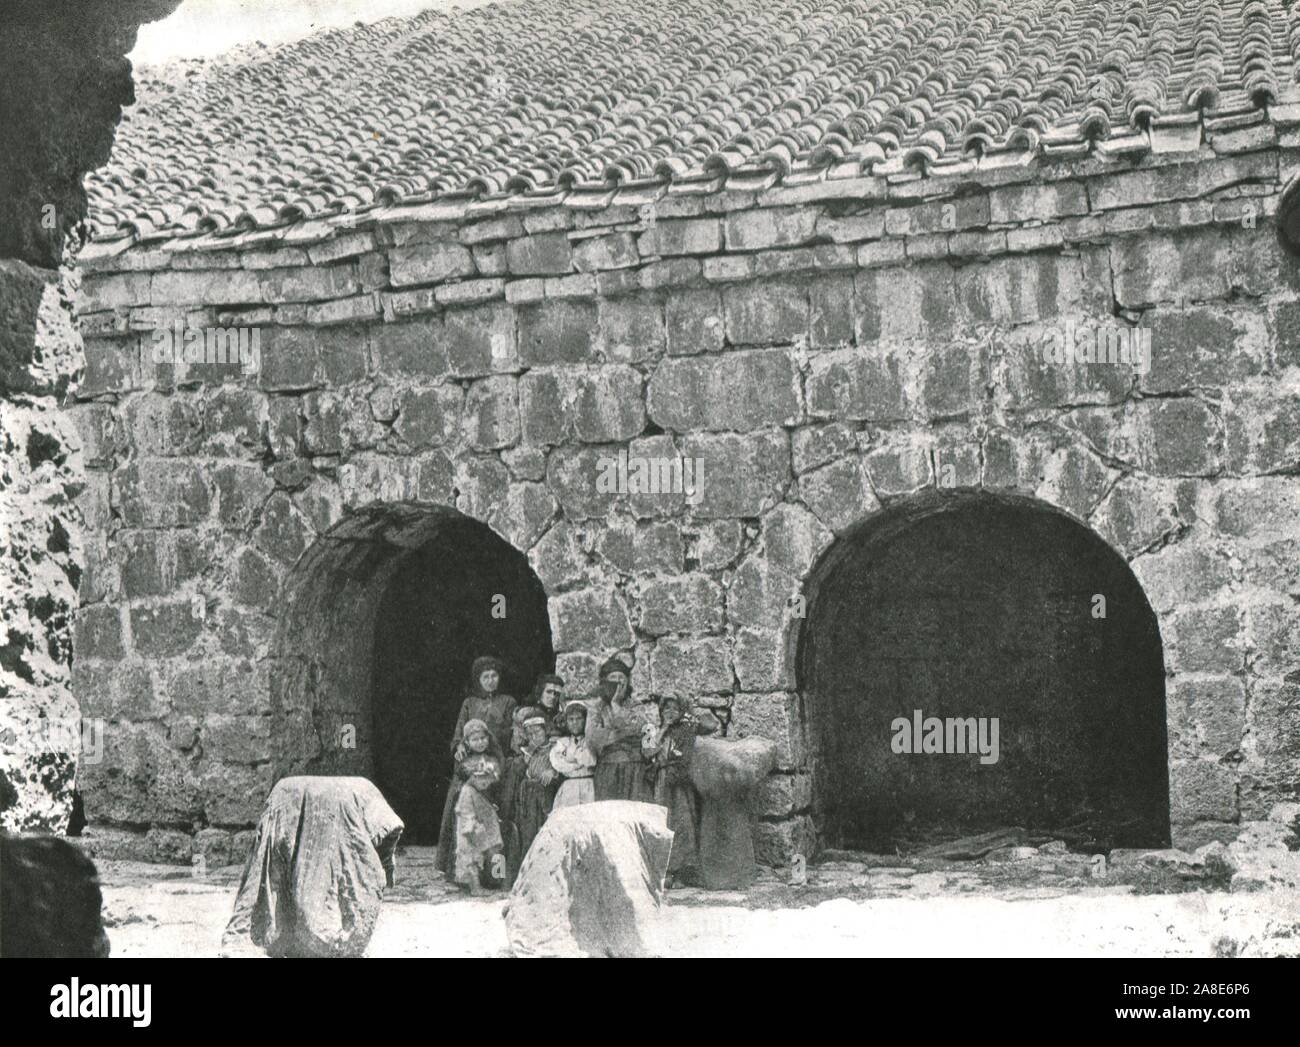 'Deir Amar', c1906-1913, (1915). Women and children outside traditional stone houses in the village of Deir al-Qamar, (Lebanon). From &quot;The Caliphs' Last Heritage, a short history of the Turkish Empire&quot; by Lt.-Col. Sir Mark Sykes. [Macmillan &amp; Co, London, 1915] Stock Photo